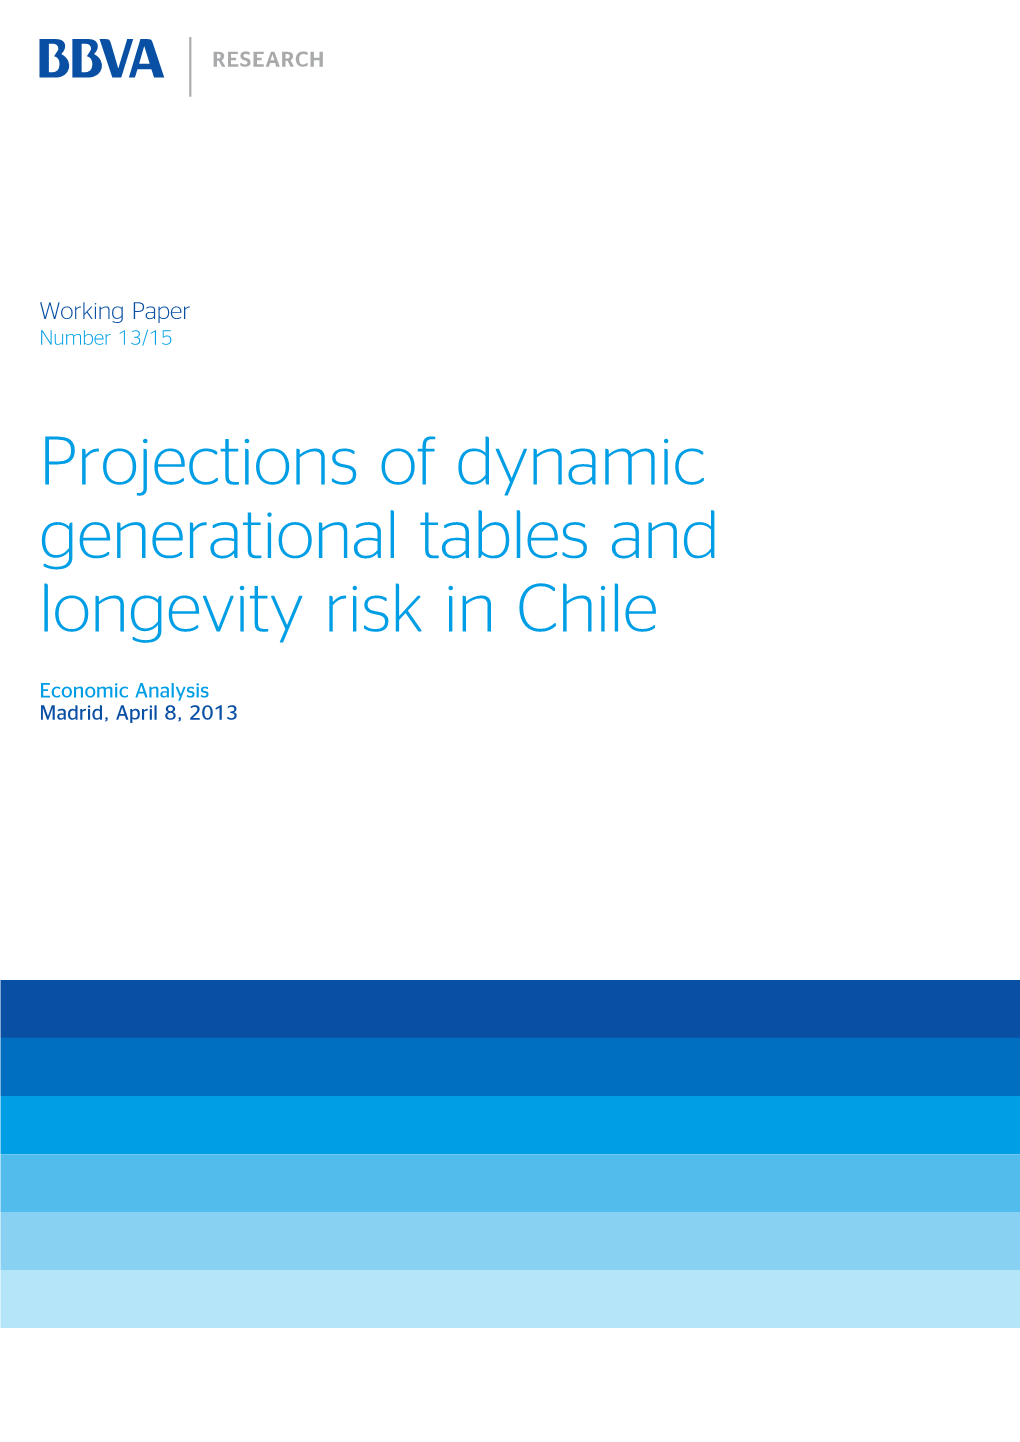 Projections of Dynamic Generational Tables and Longevity Risk in Chile